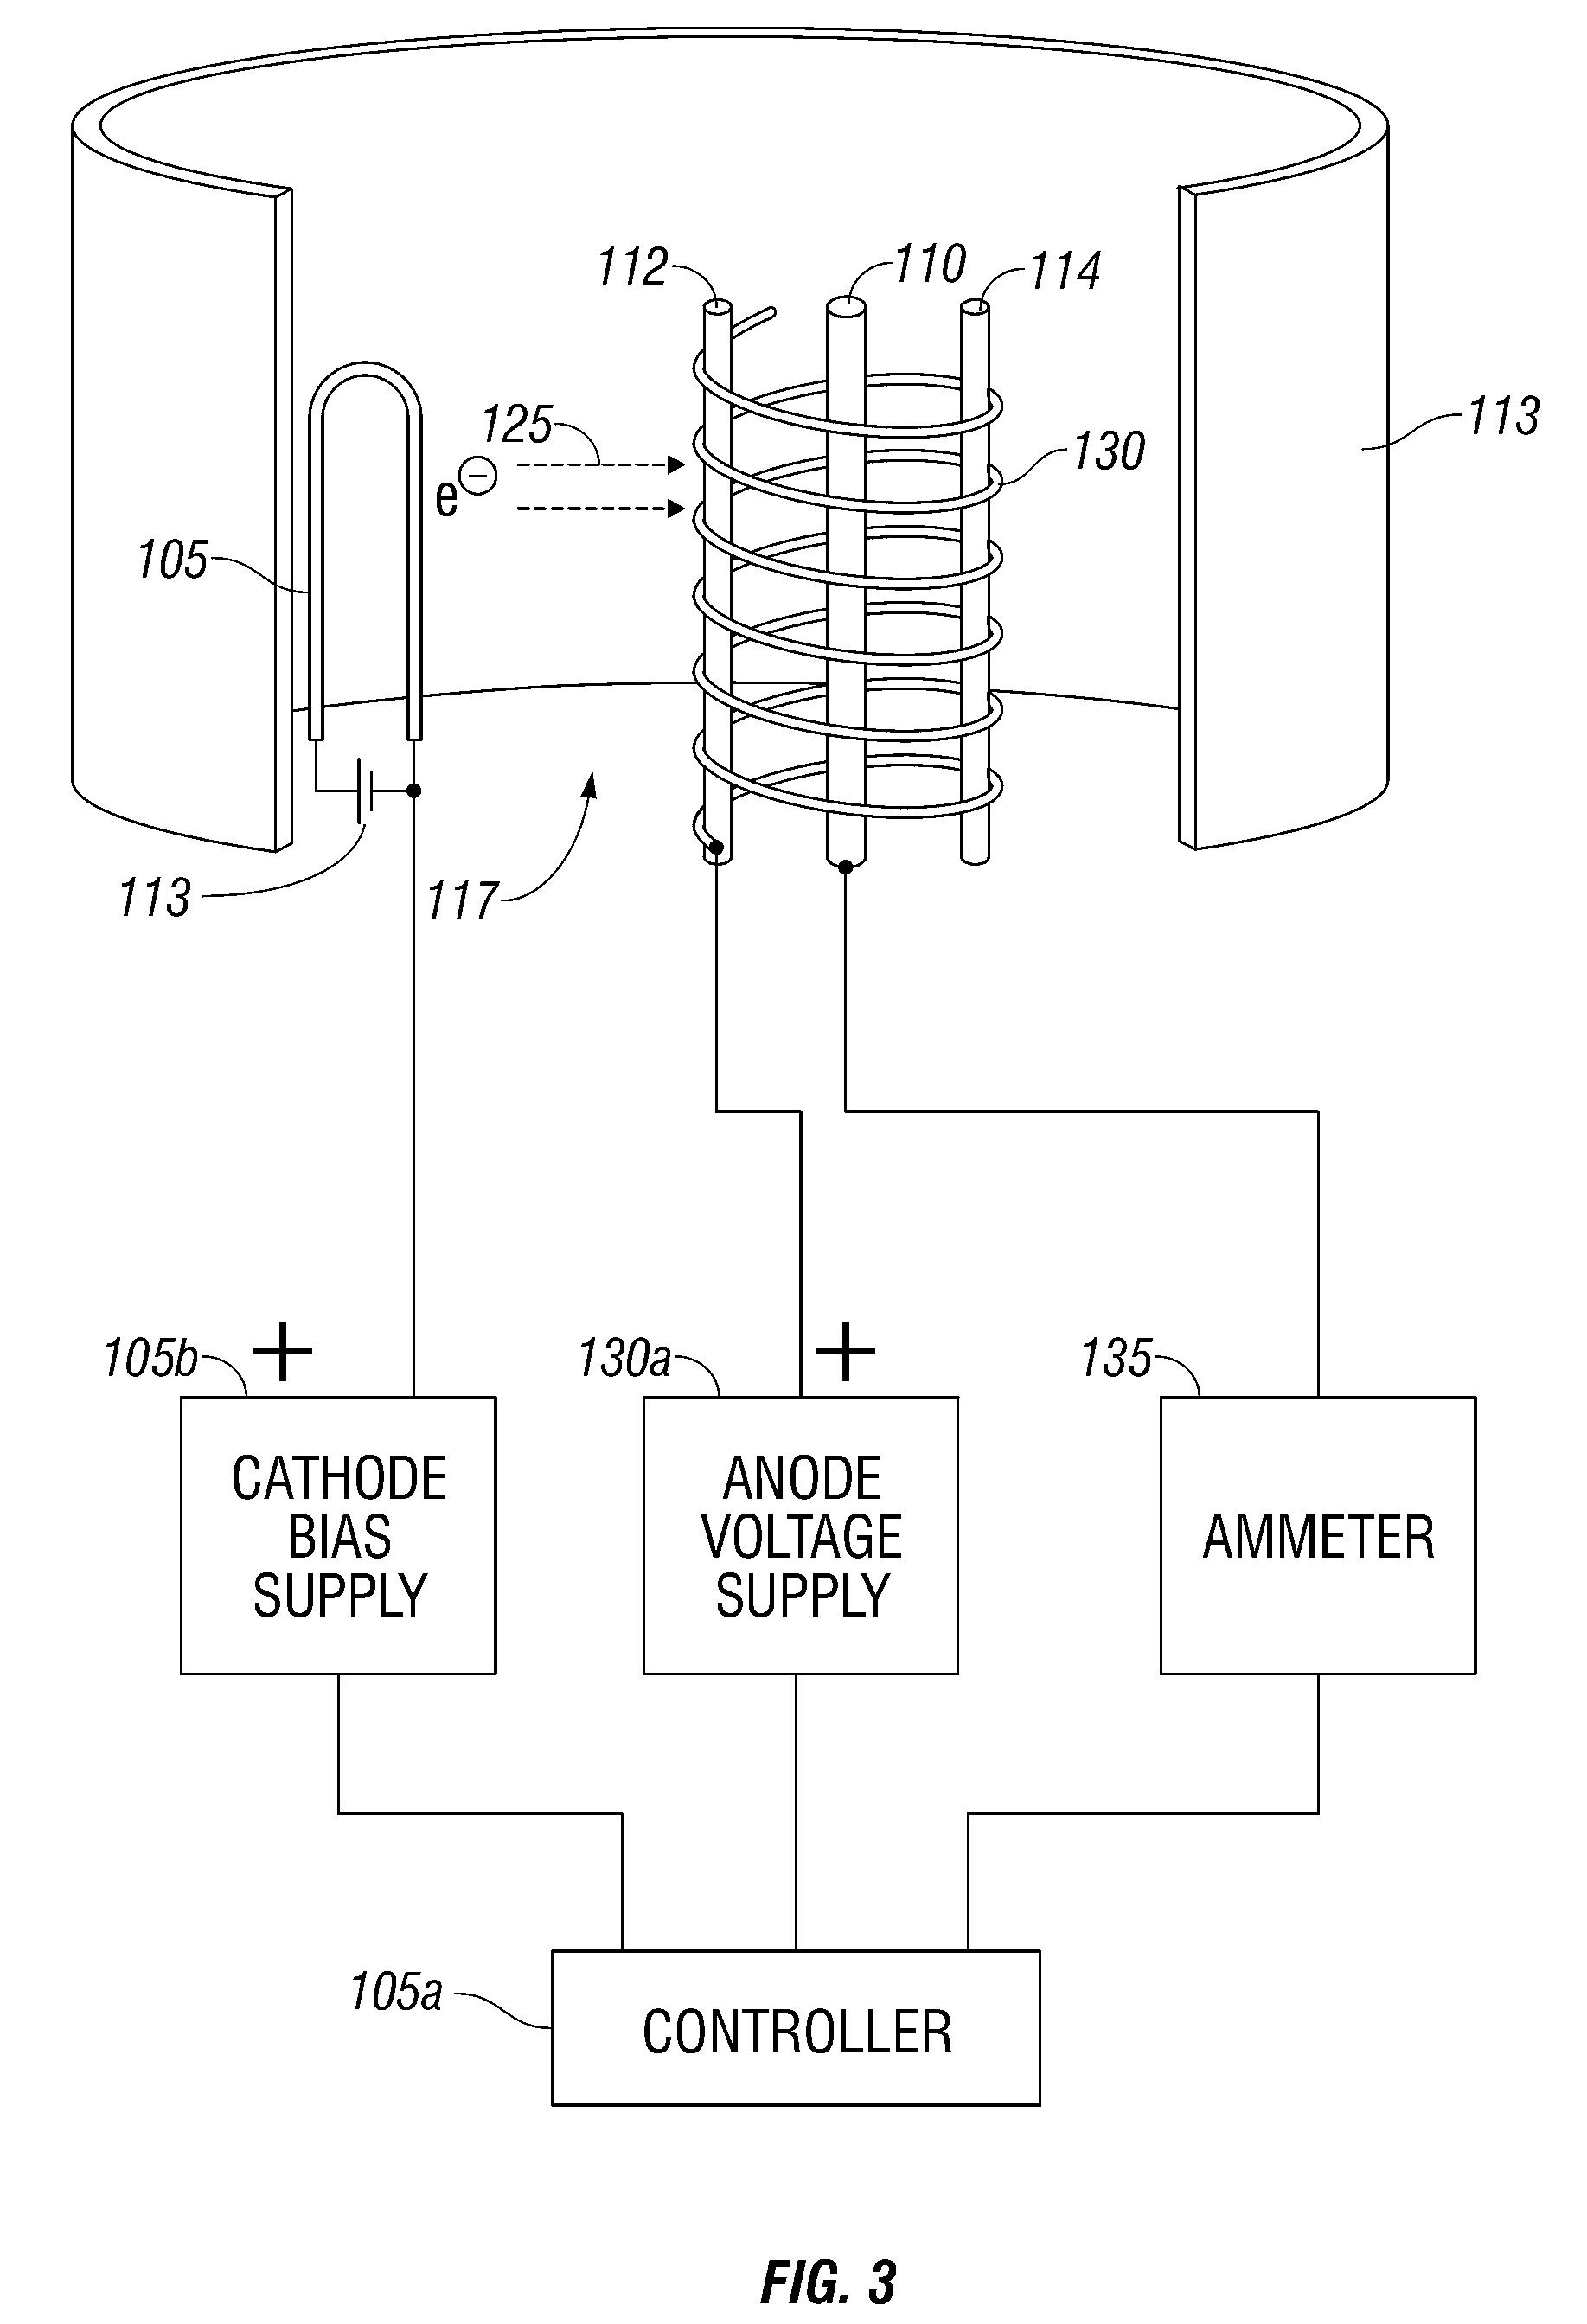 Ionization gauge with operational parameters and geometry designed for high pressure operation